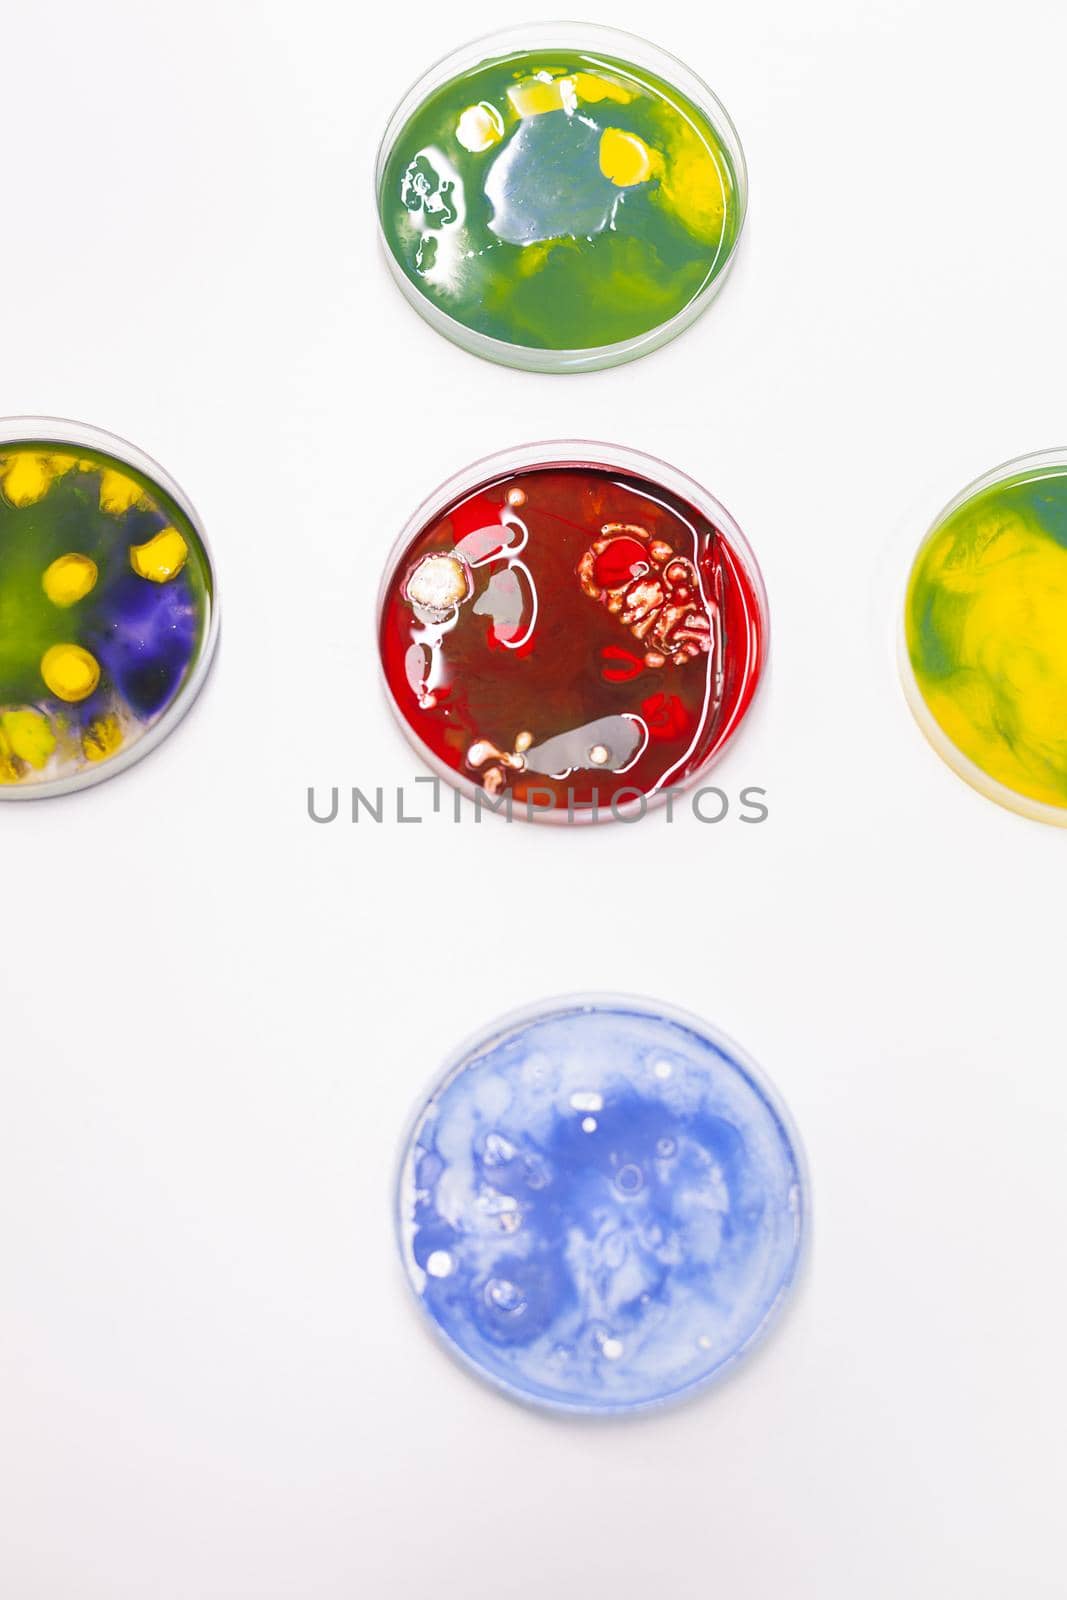 Mixed of bacteria colony in petri dish standing on table in biological scientific hospital laboratory. by DCStudio